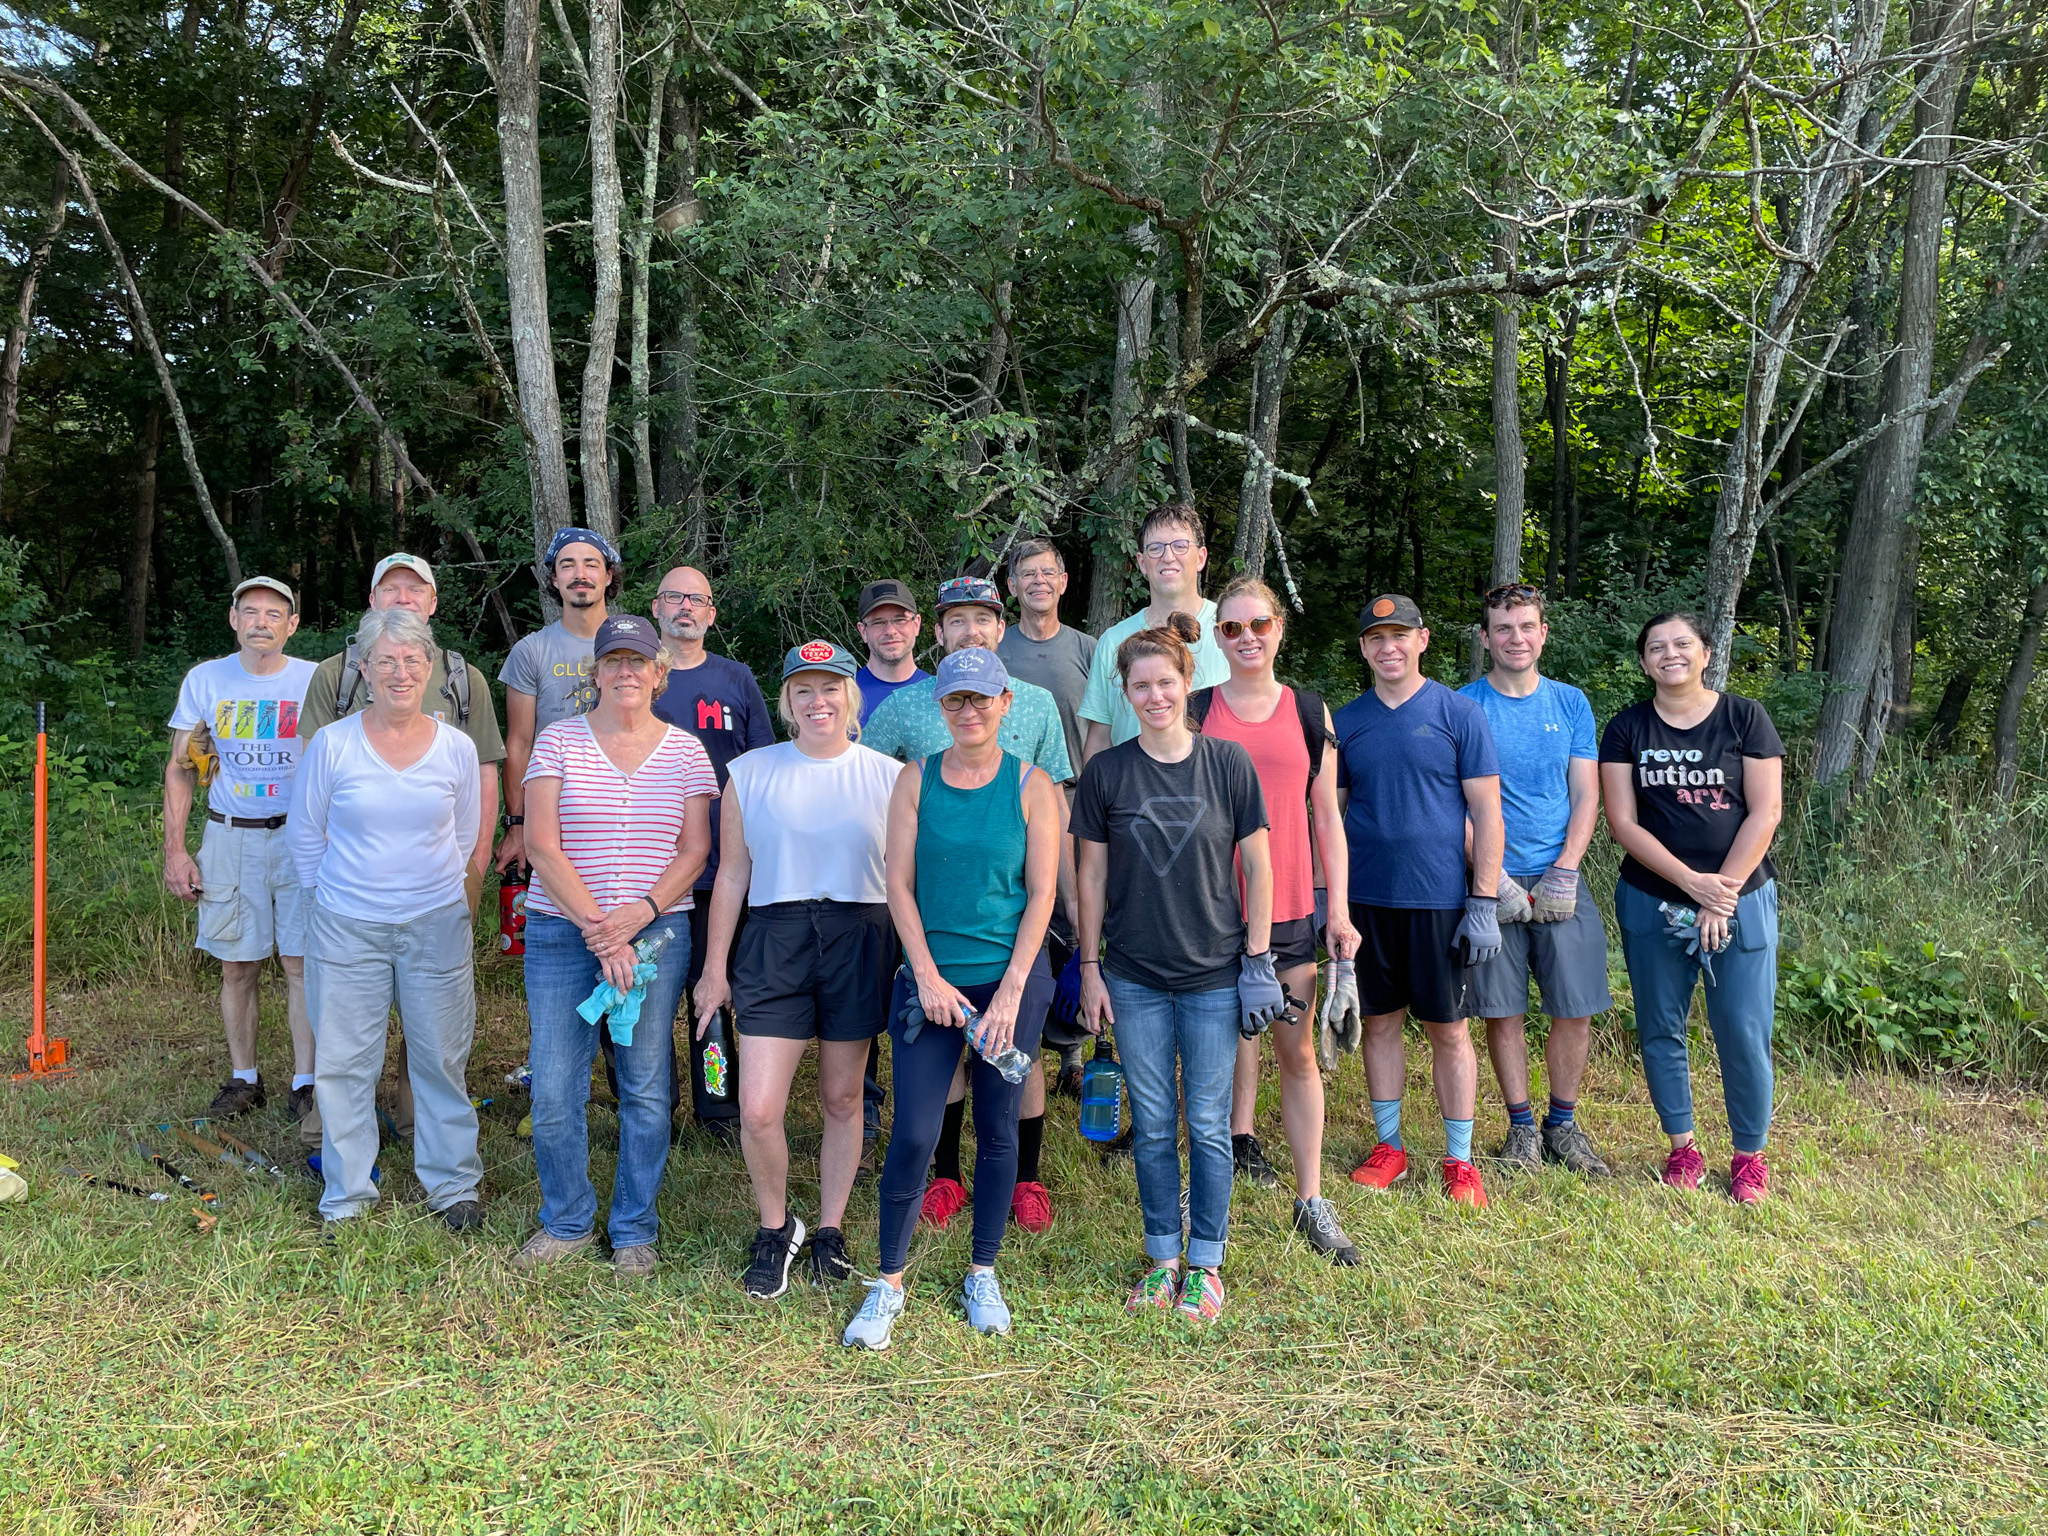 ZSuite Employees posing alongside three members of the Simsbury Land Trust at the edge of a Connecticut forest